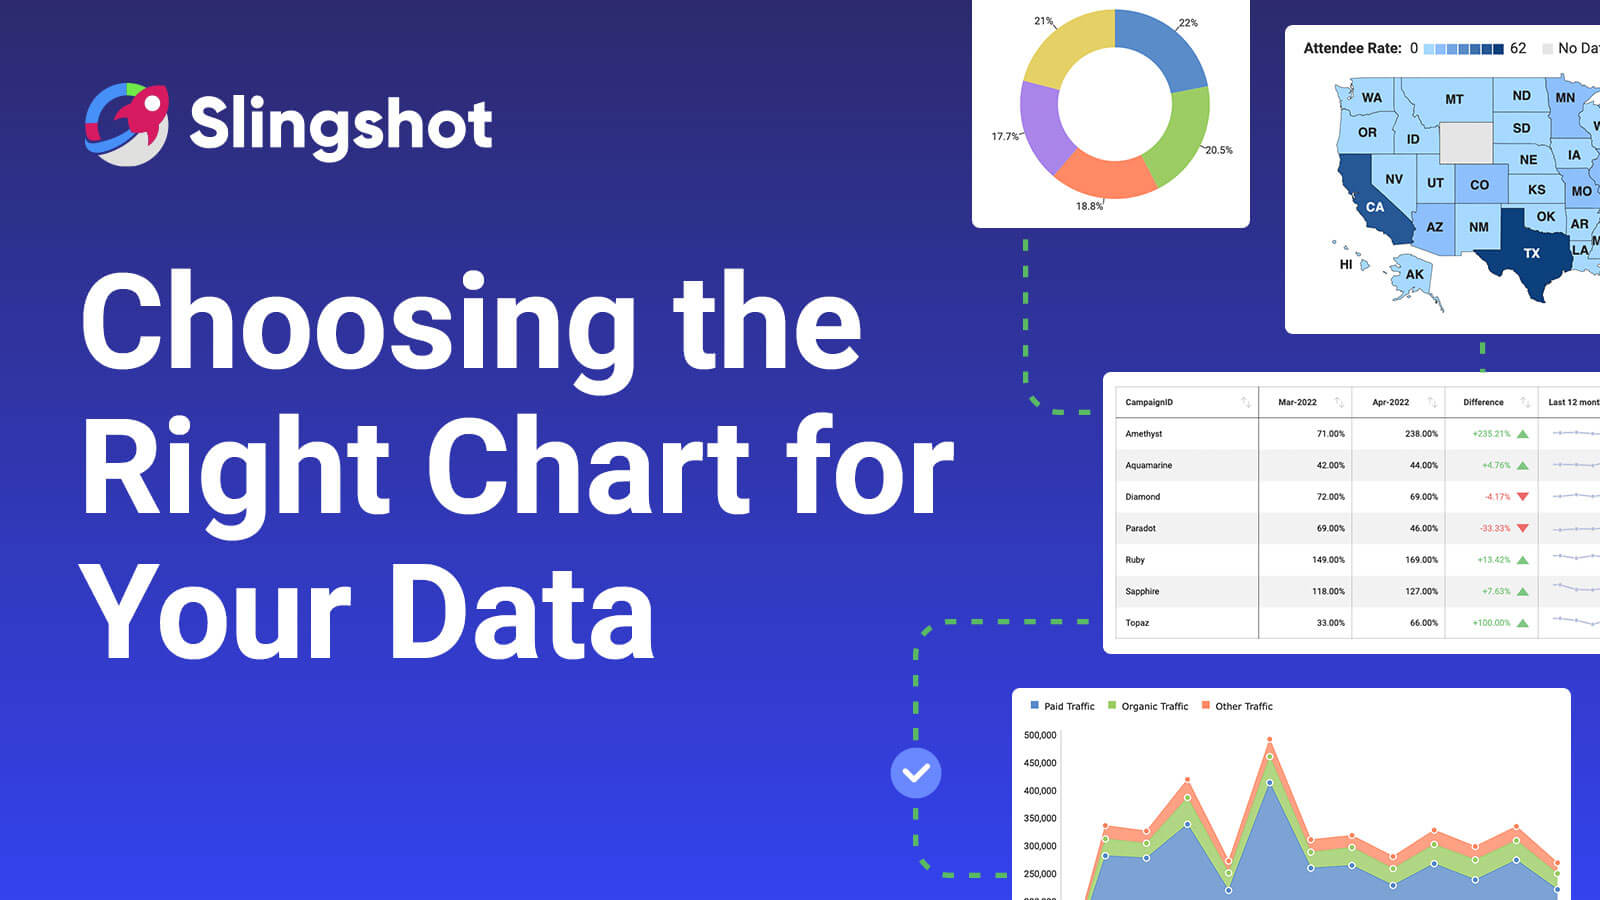 Learn how to choose the right chart for your data.